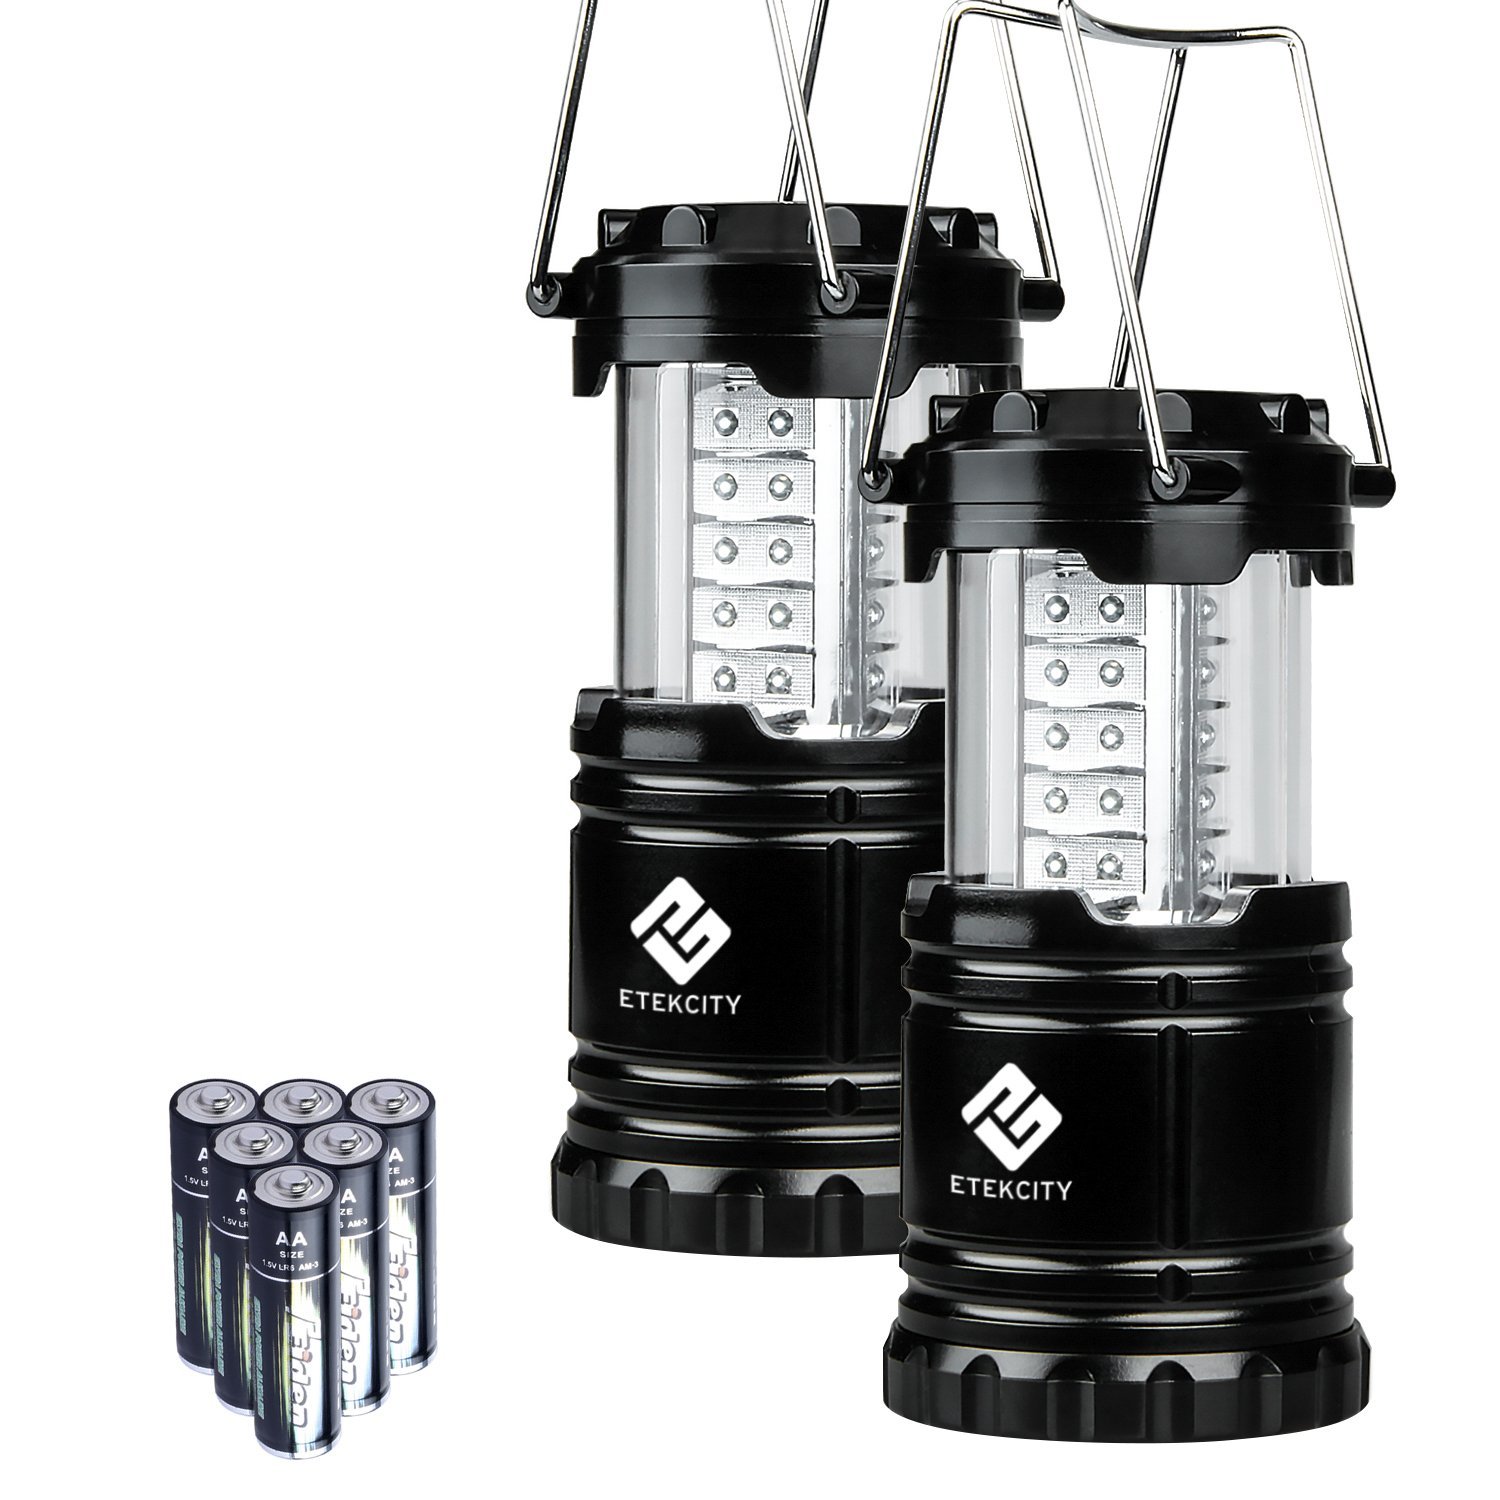 Portable Outdoor LED Camping Lantern 2-Pack